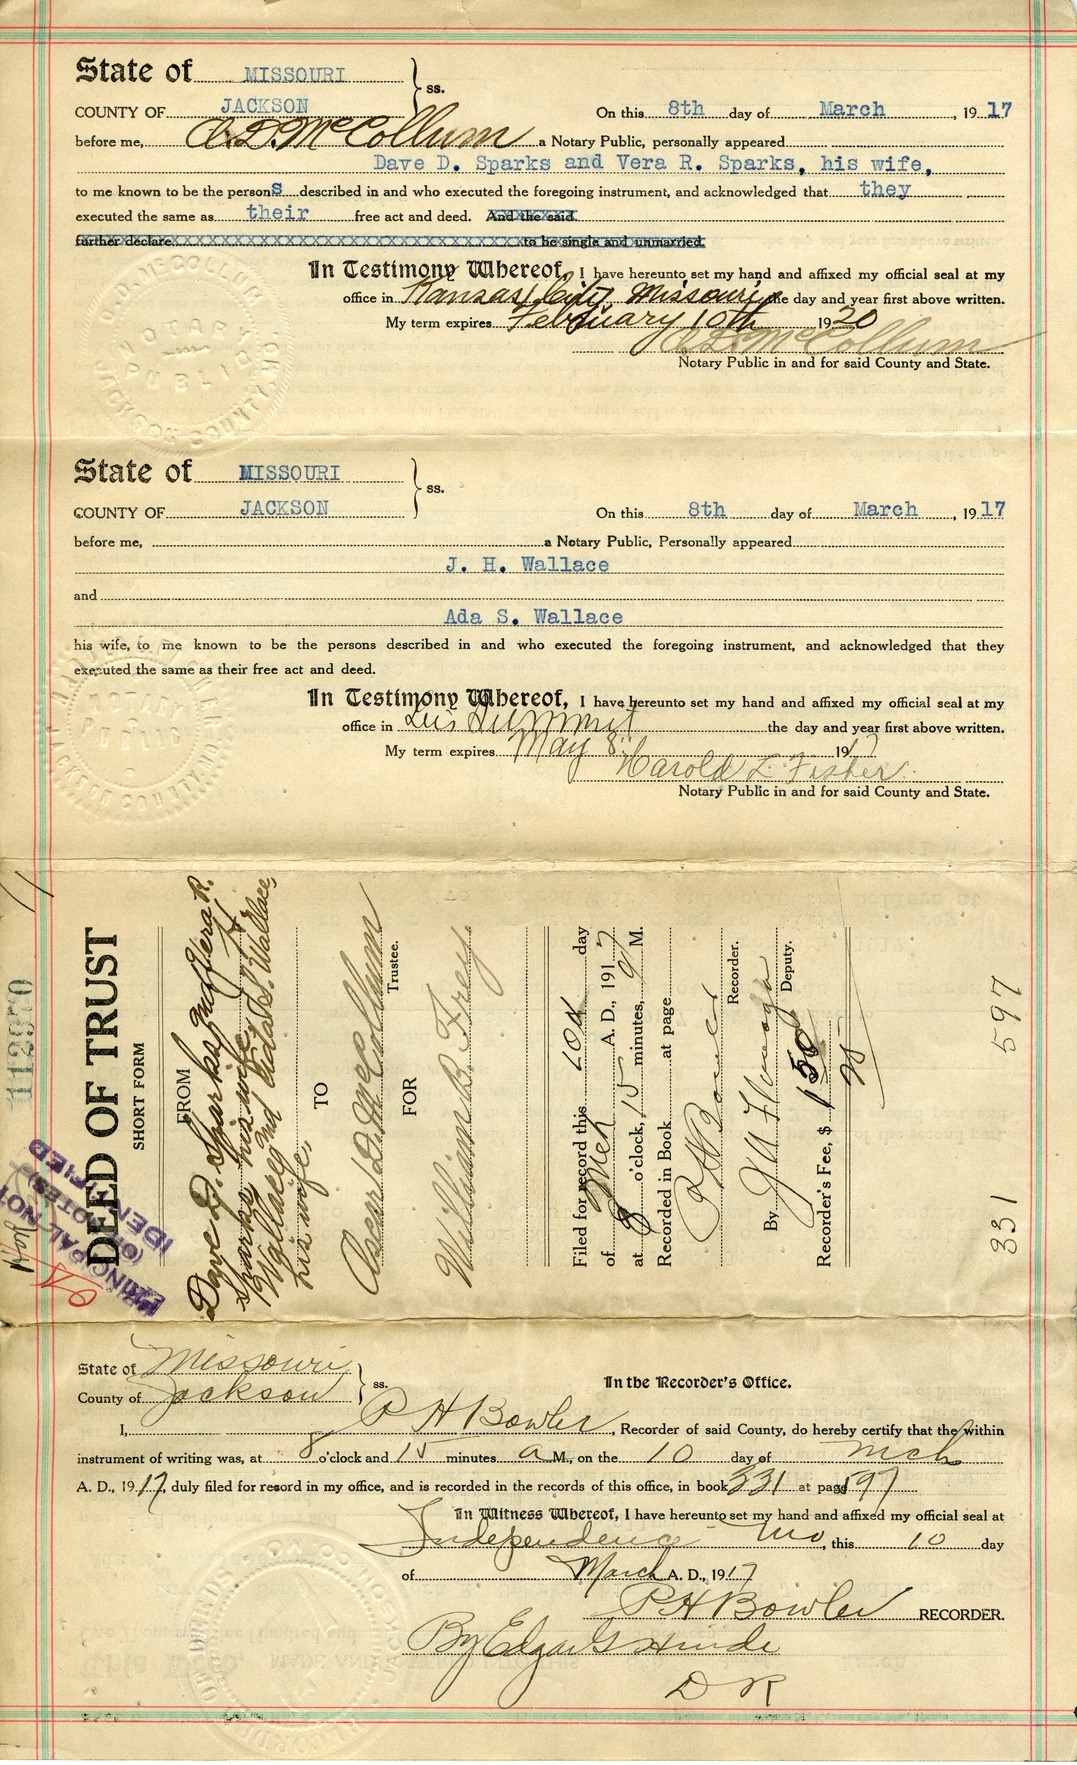 Deed of Trust from Dave D. Sparks et al. to Oscar D. McCollum for William B. Frey